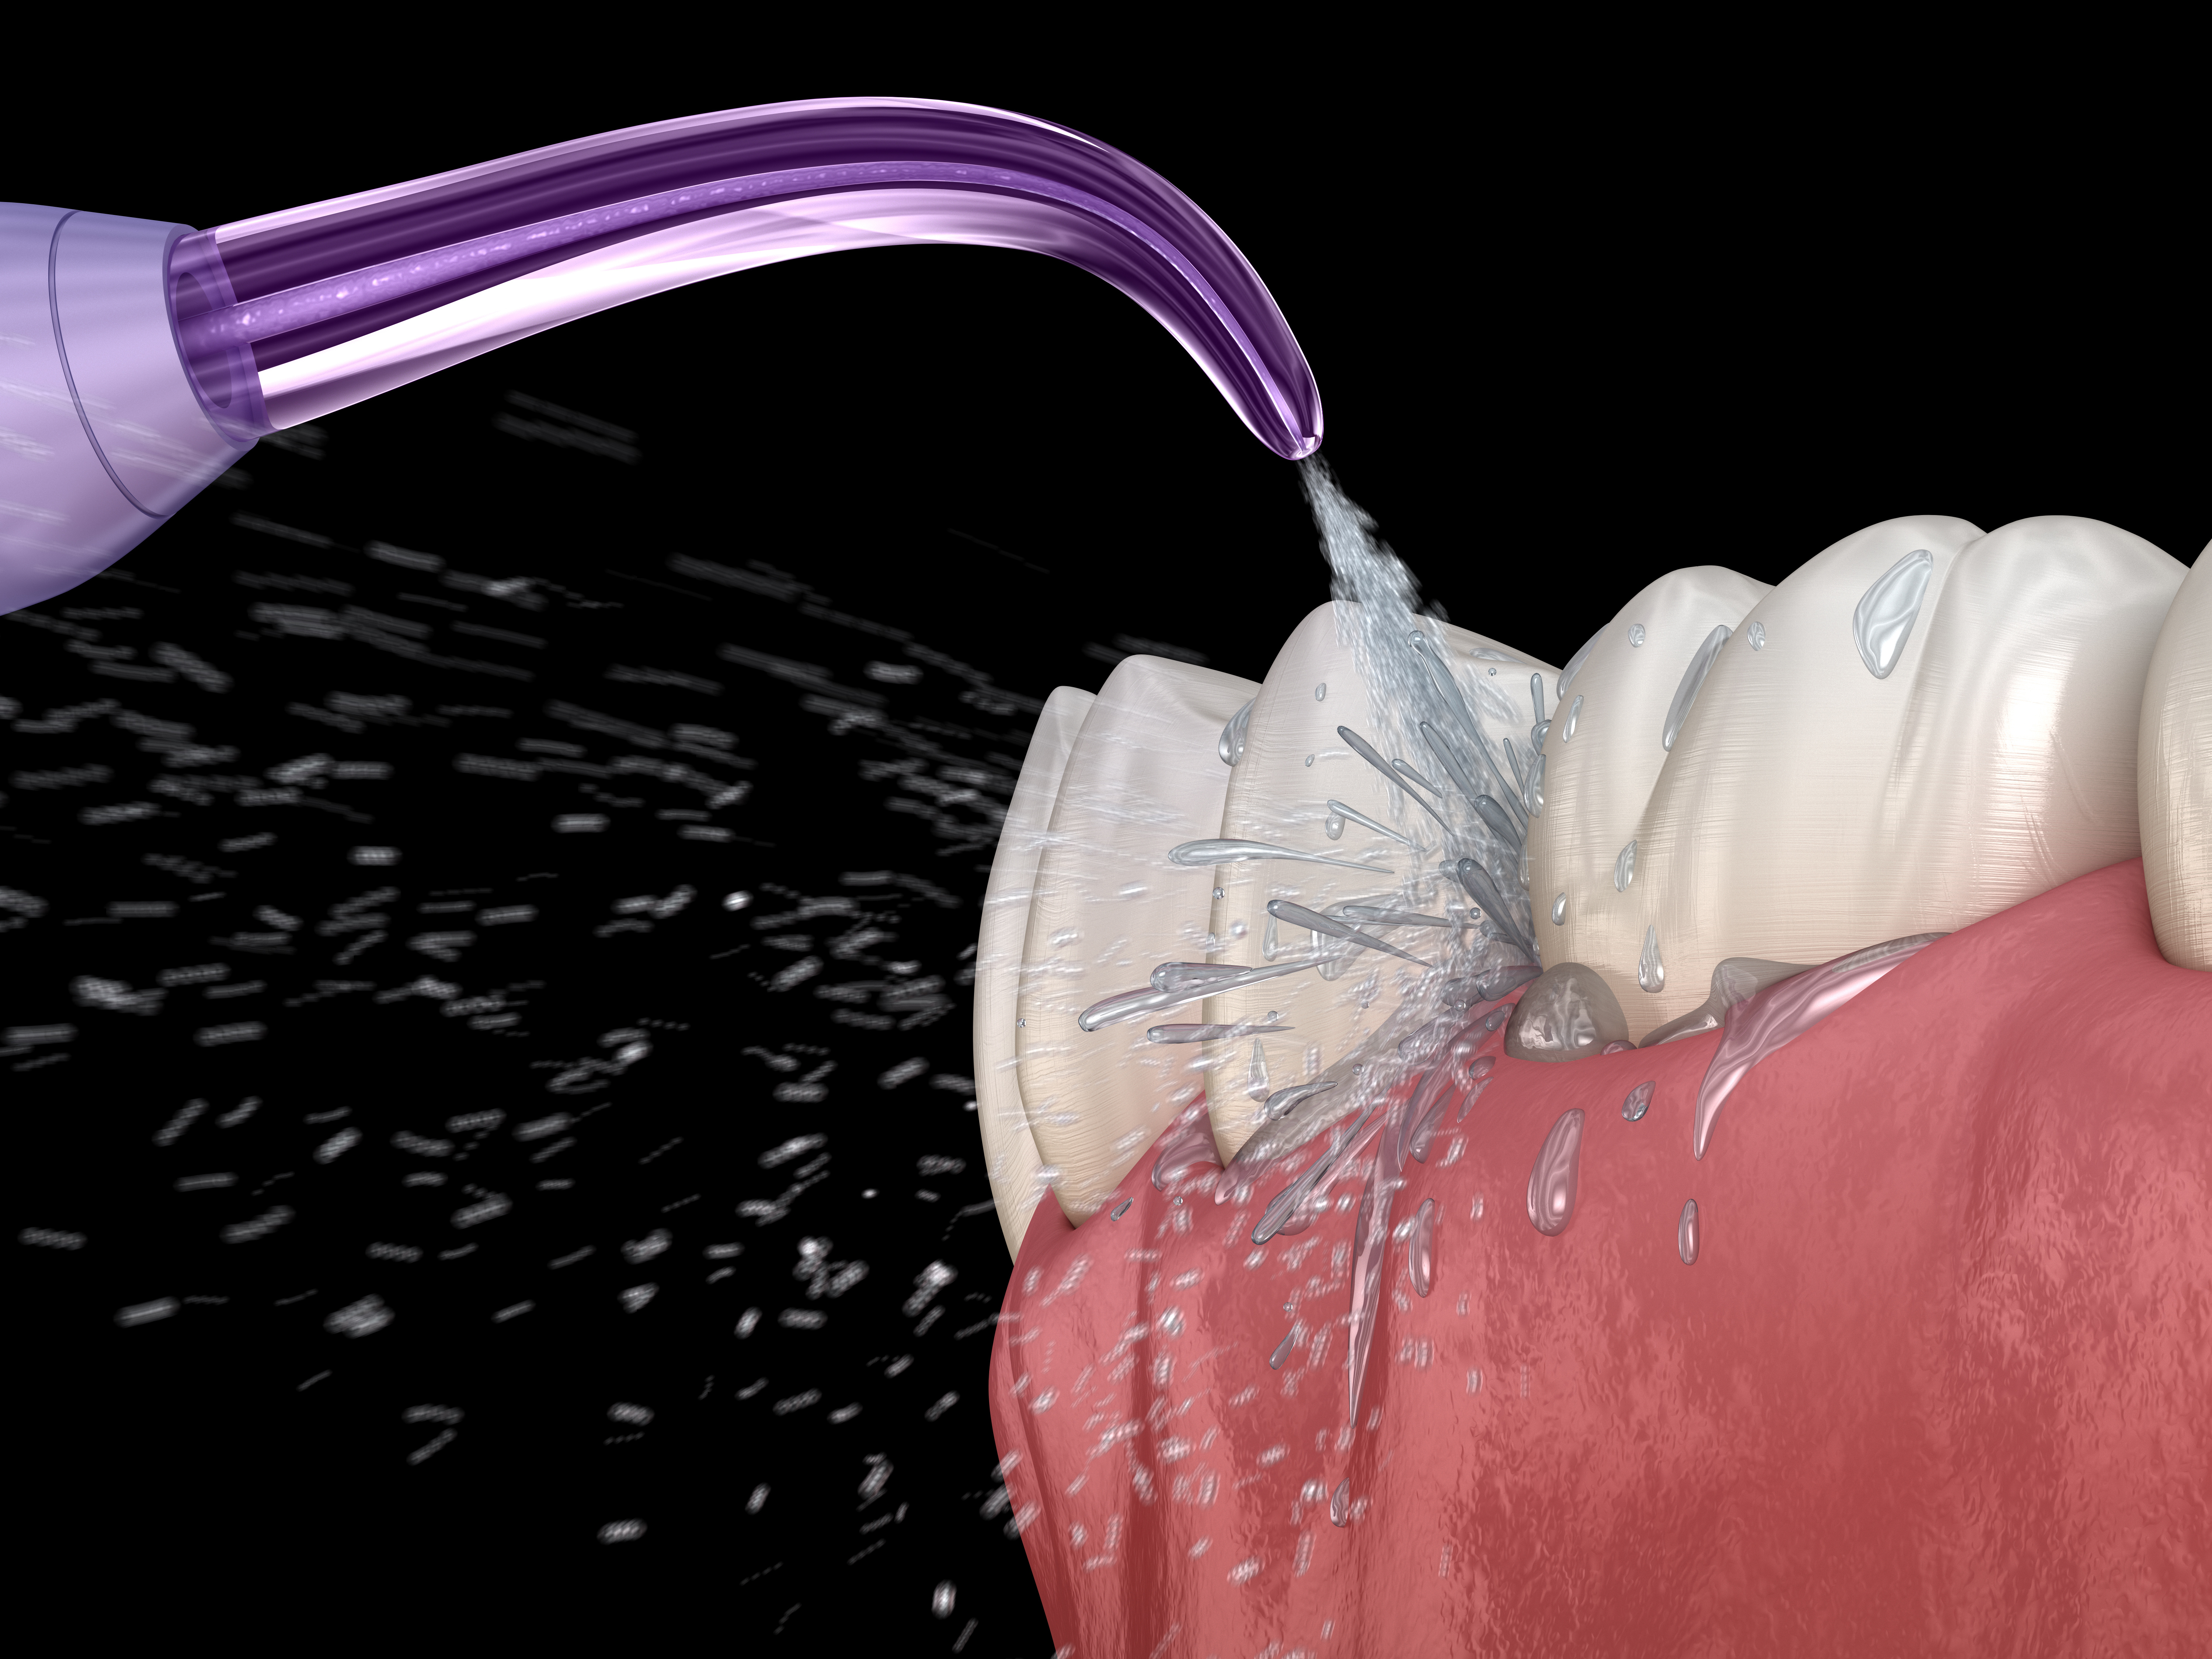 Illustration showing pressurized water coming from a purple tip of a oral irrigator (water pick) shooting in between two lower teeth